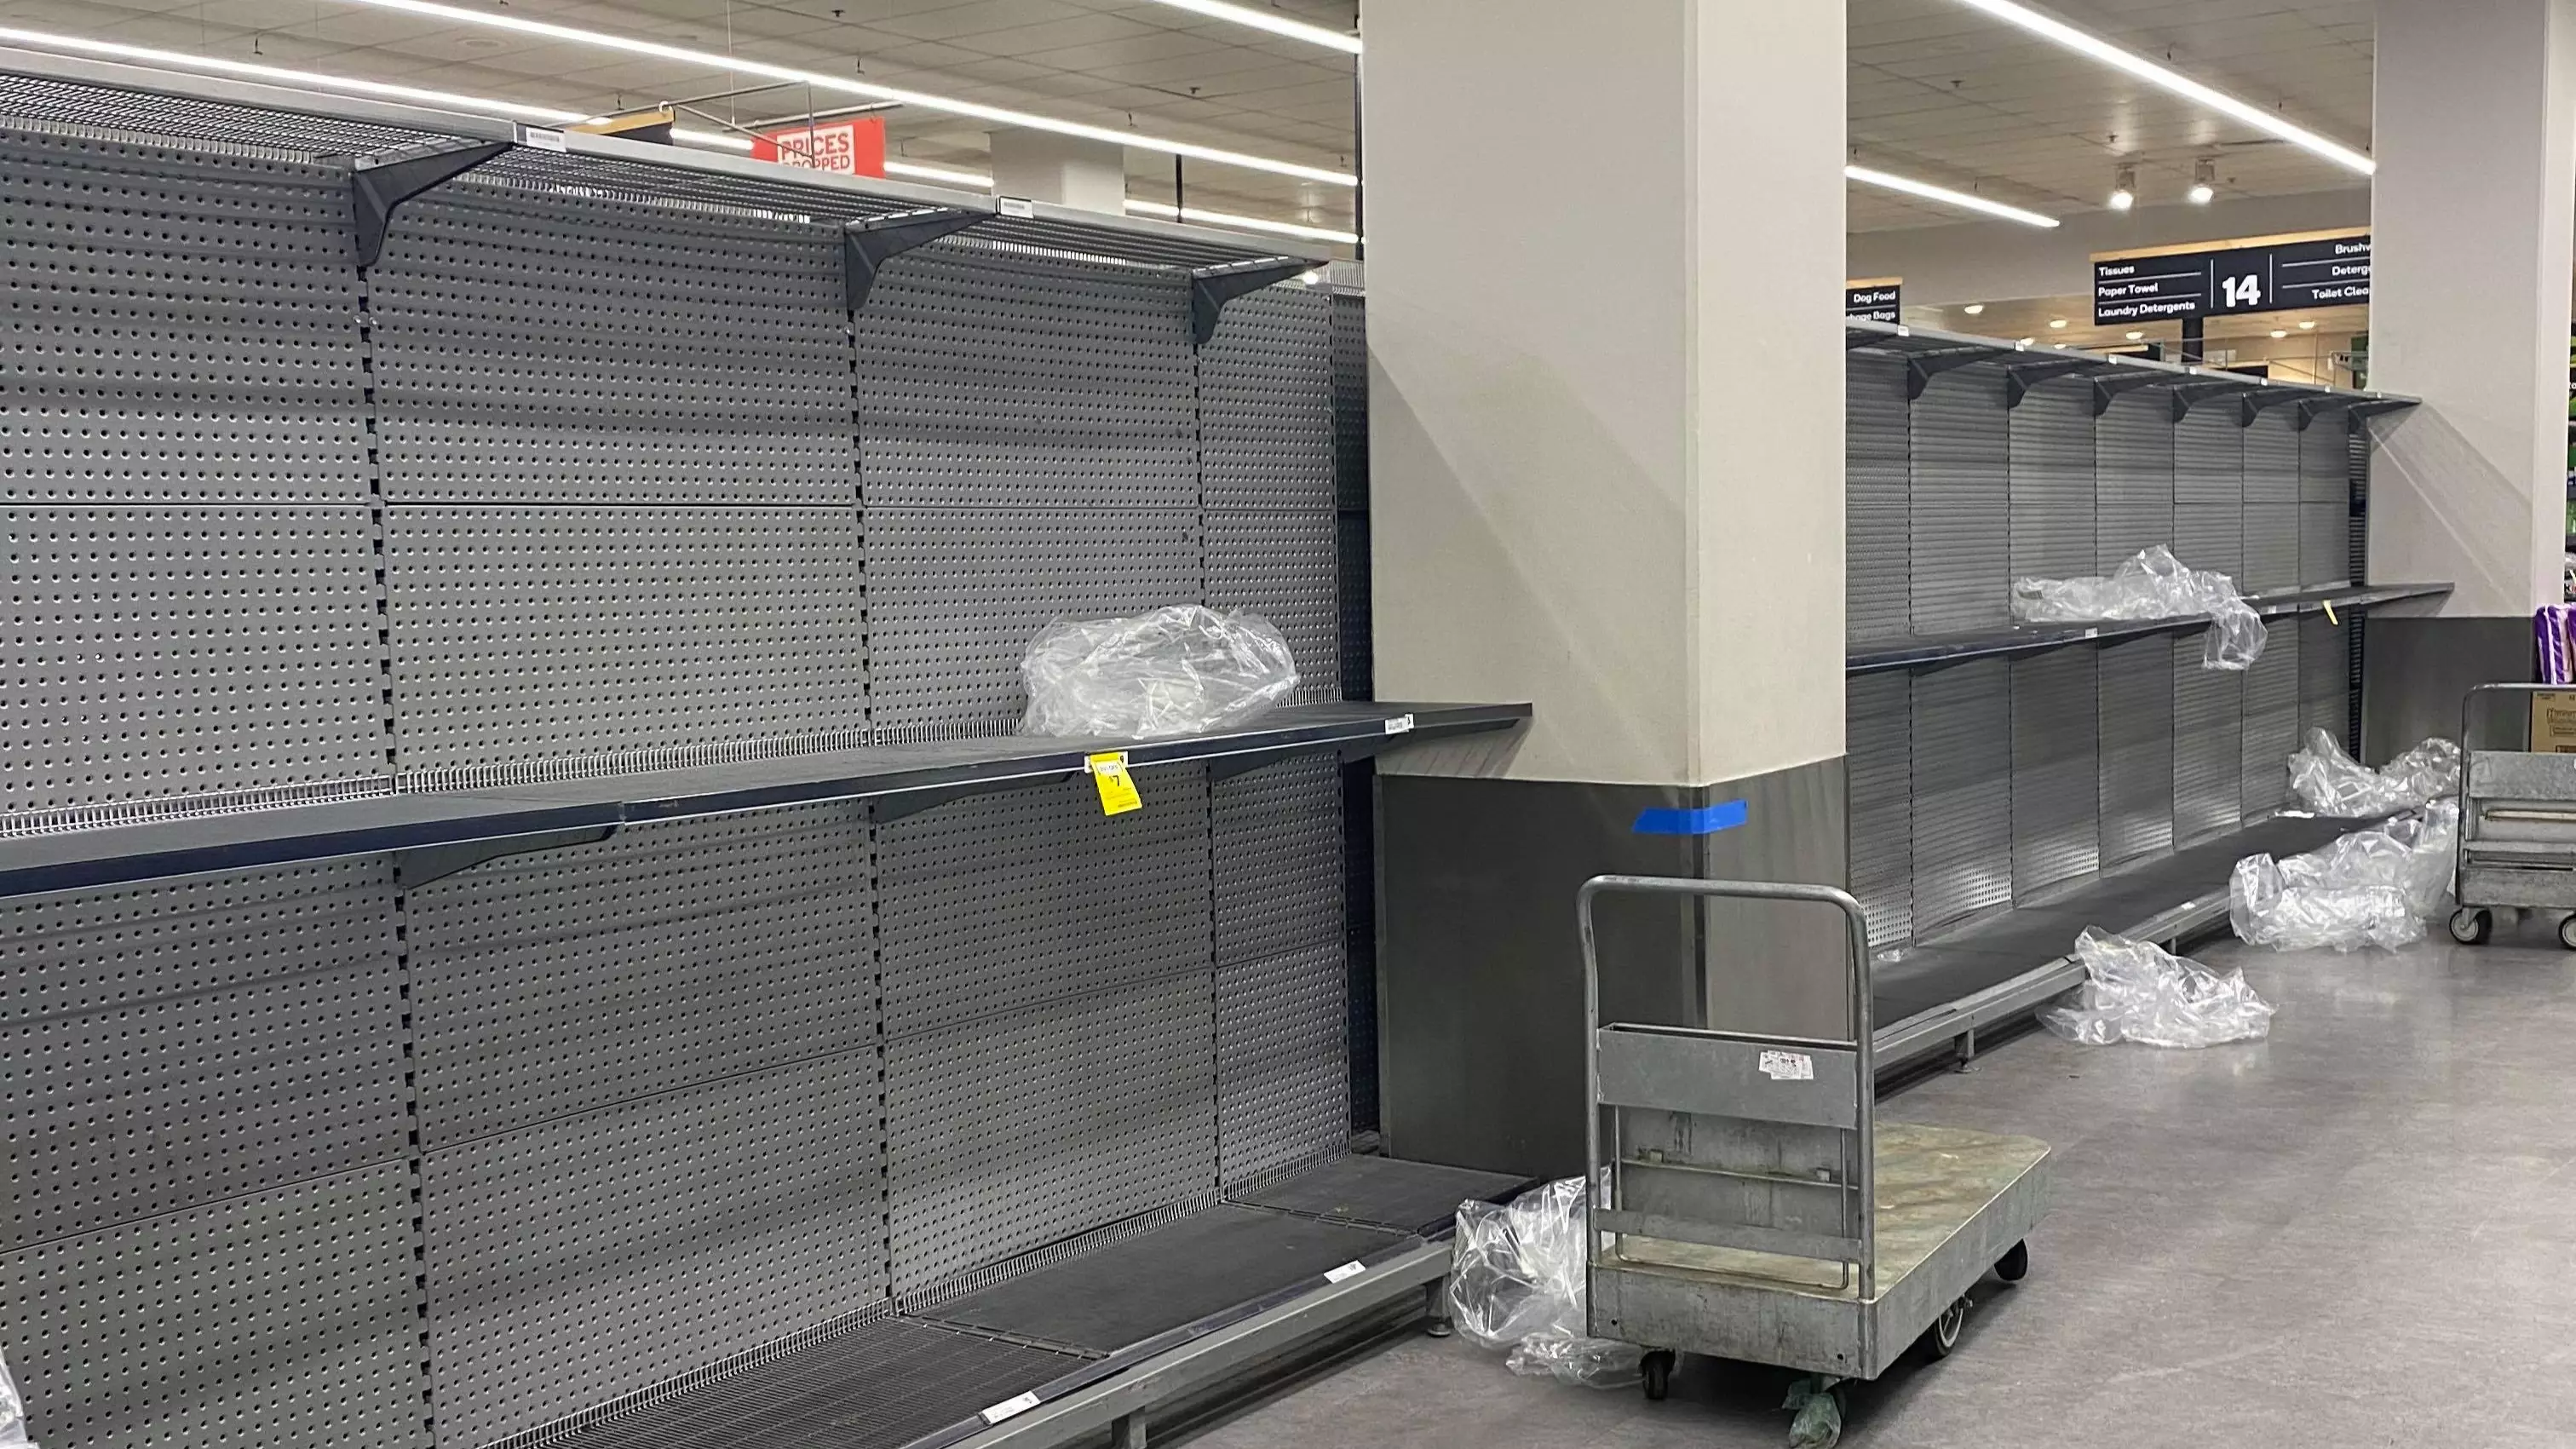 Aussie Supermarkets Are Being Wiped Clean Over Coronavirus Fears